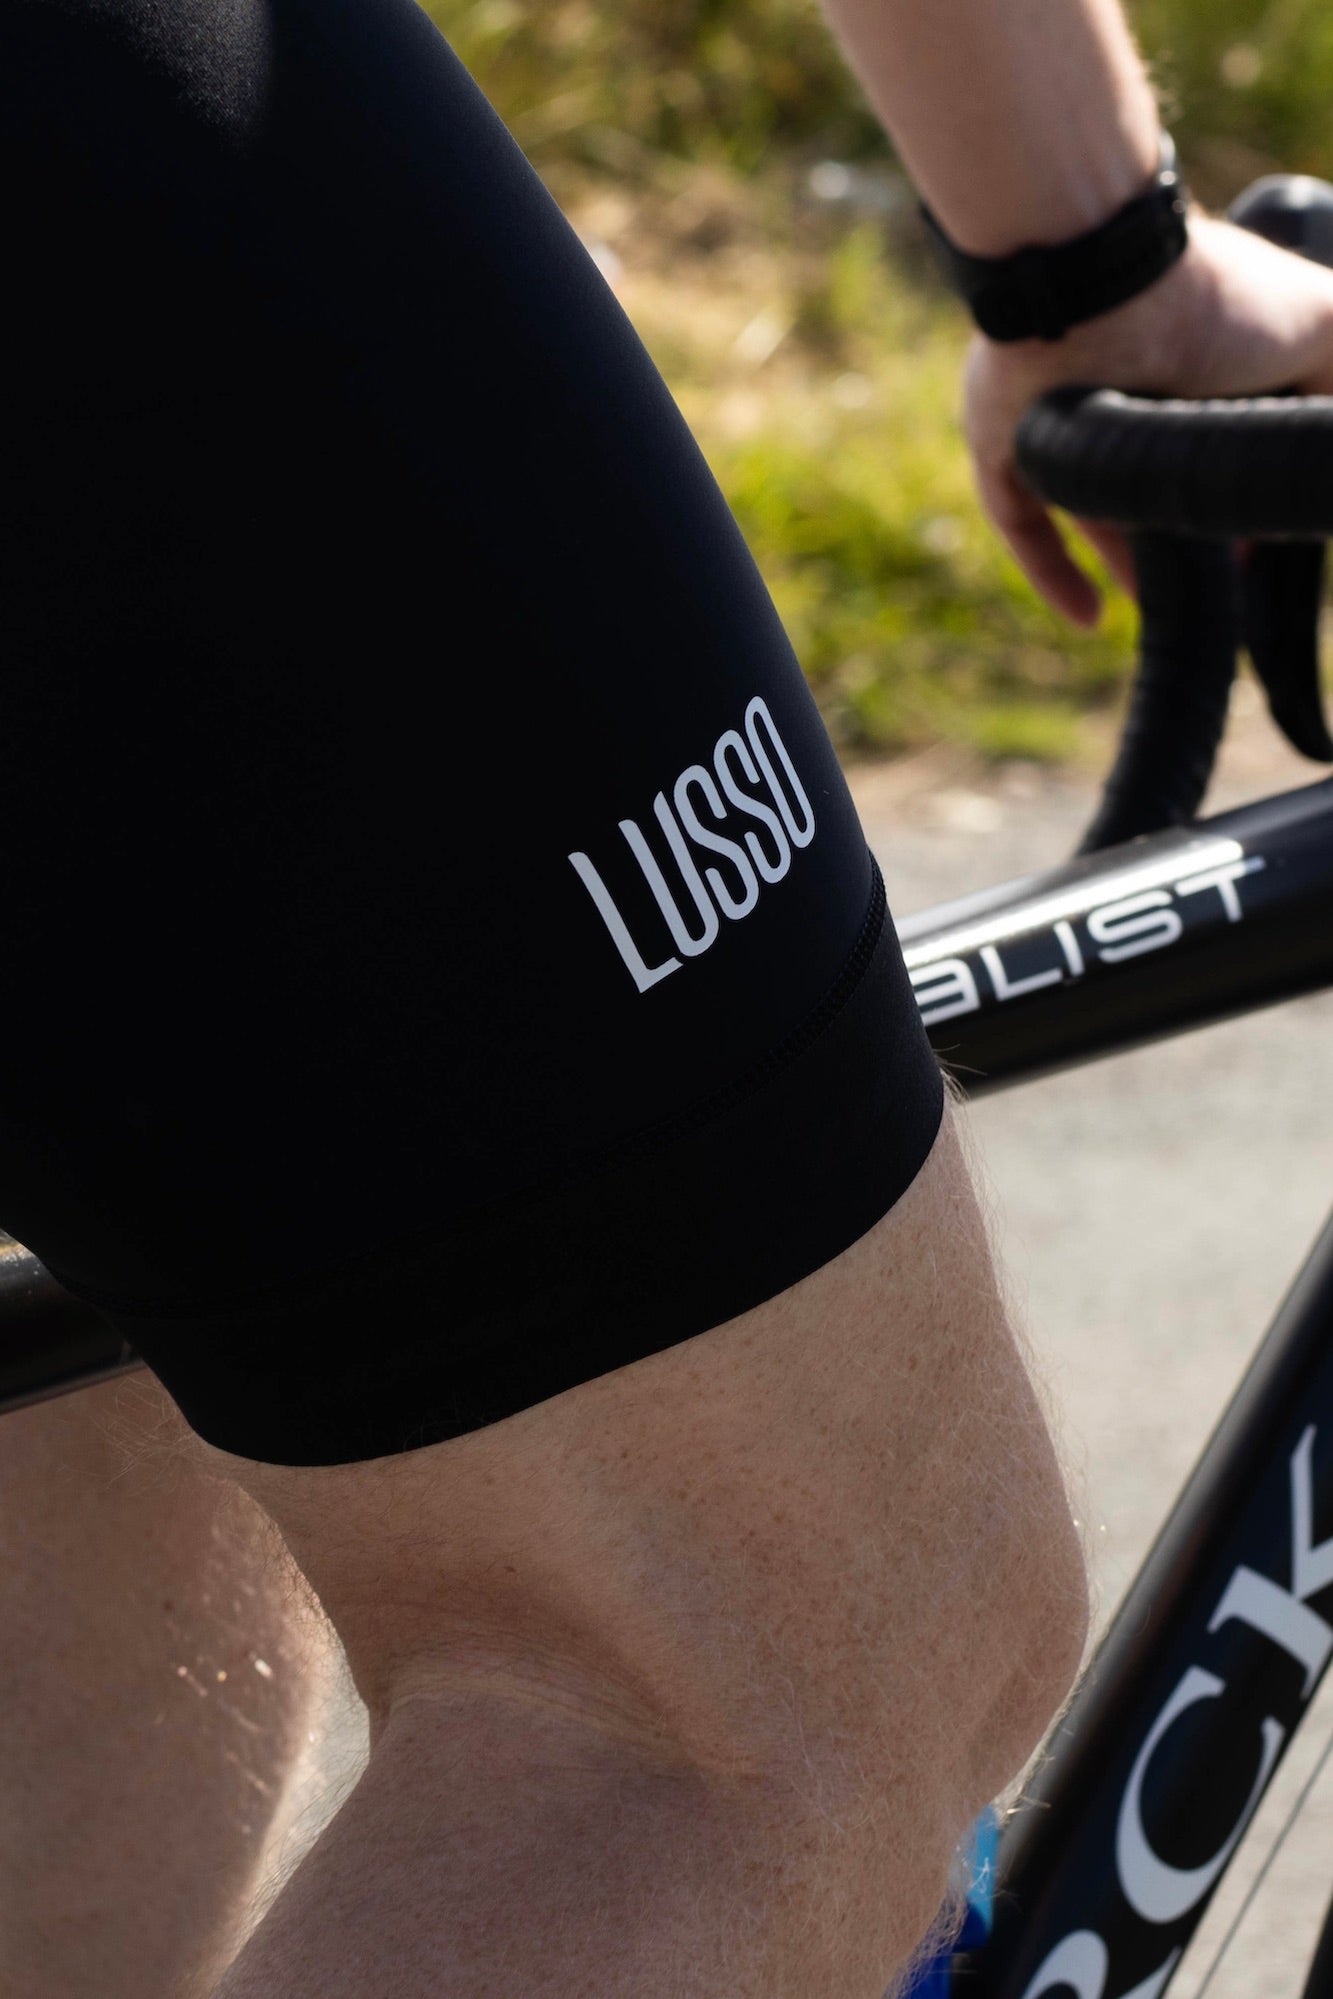 Primary Bib Shorts - Lusso Cycle Wear